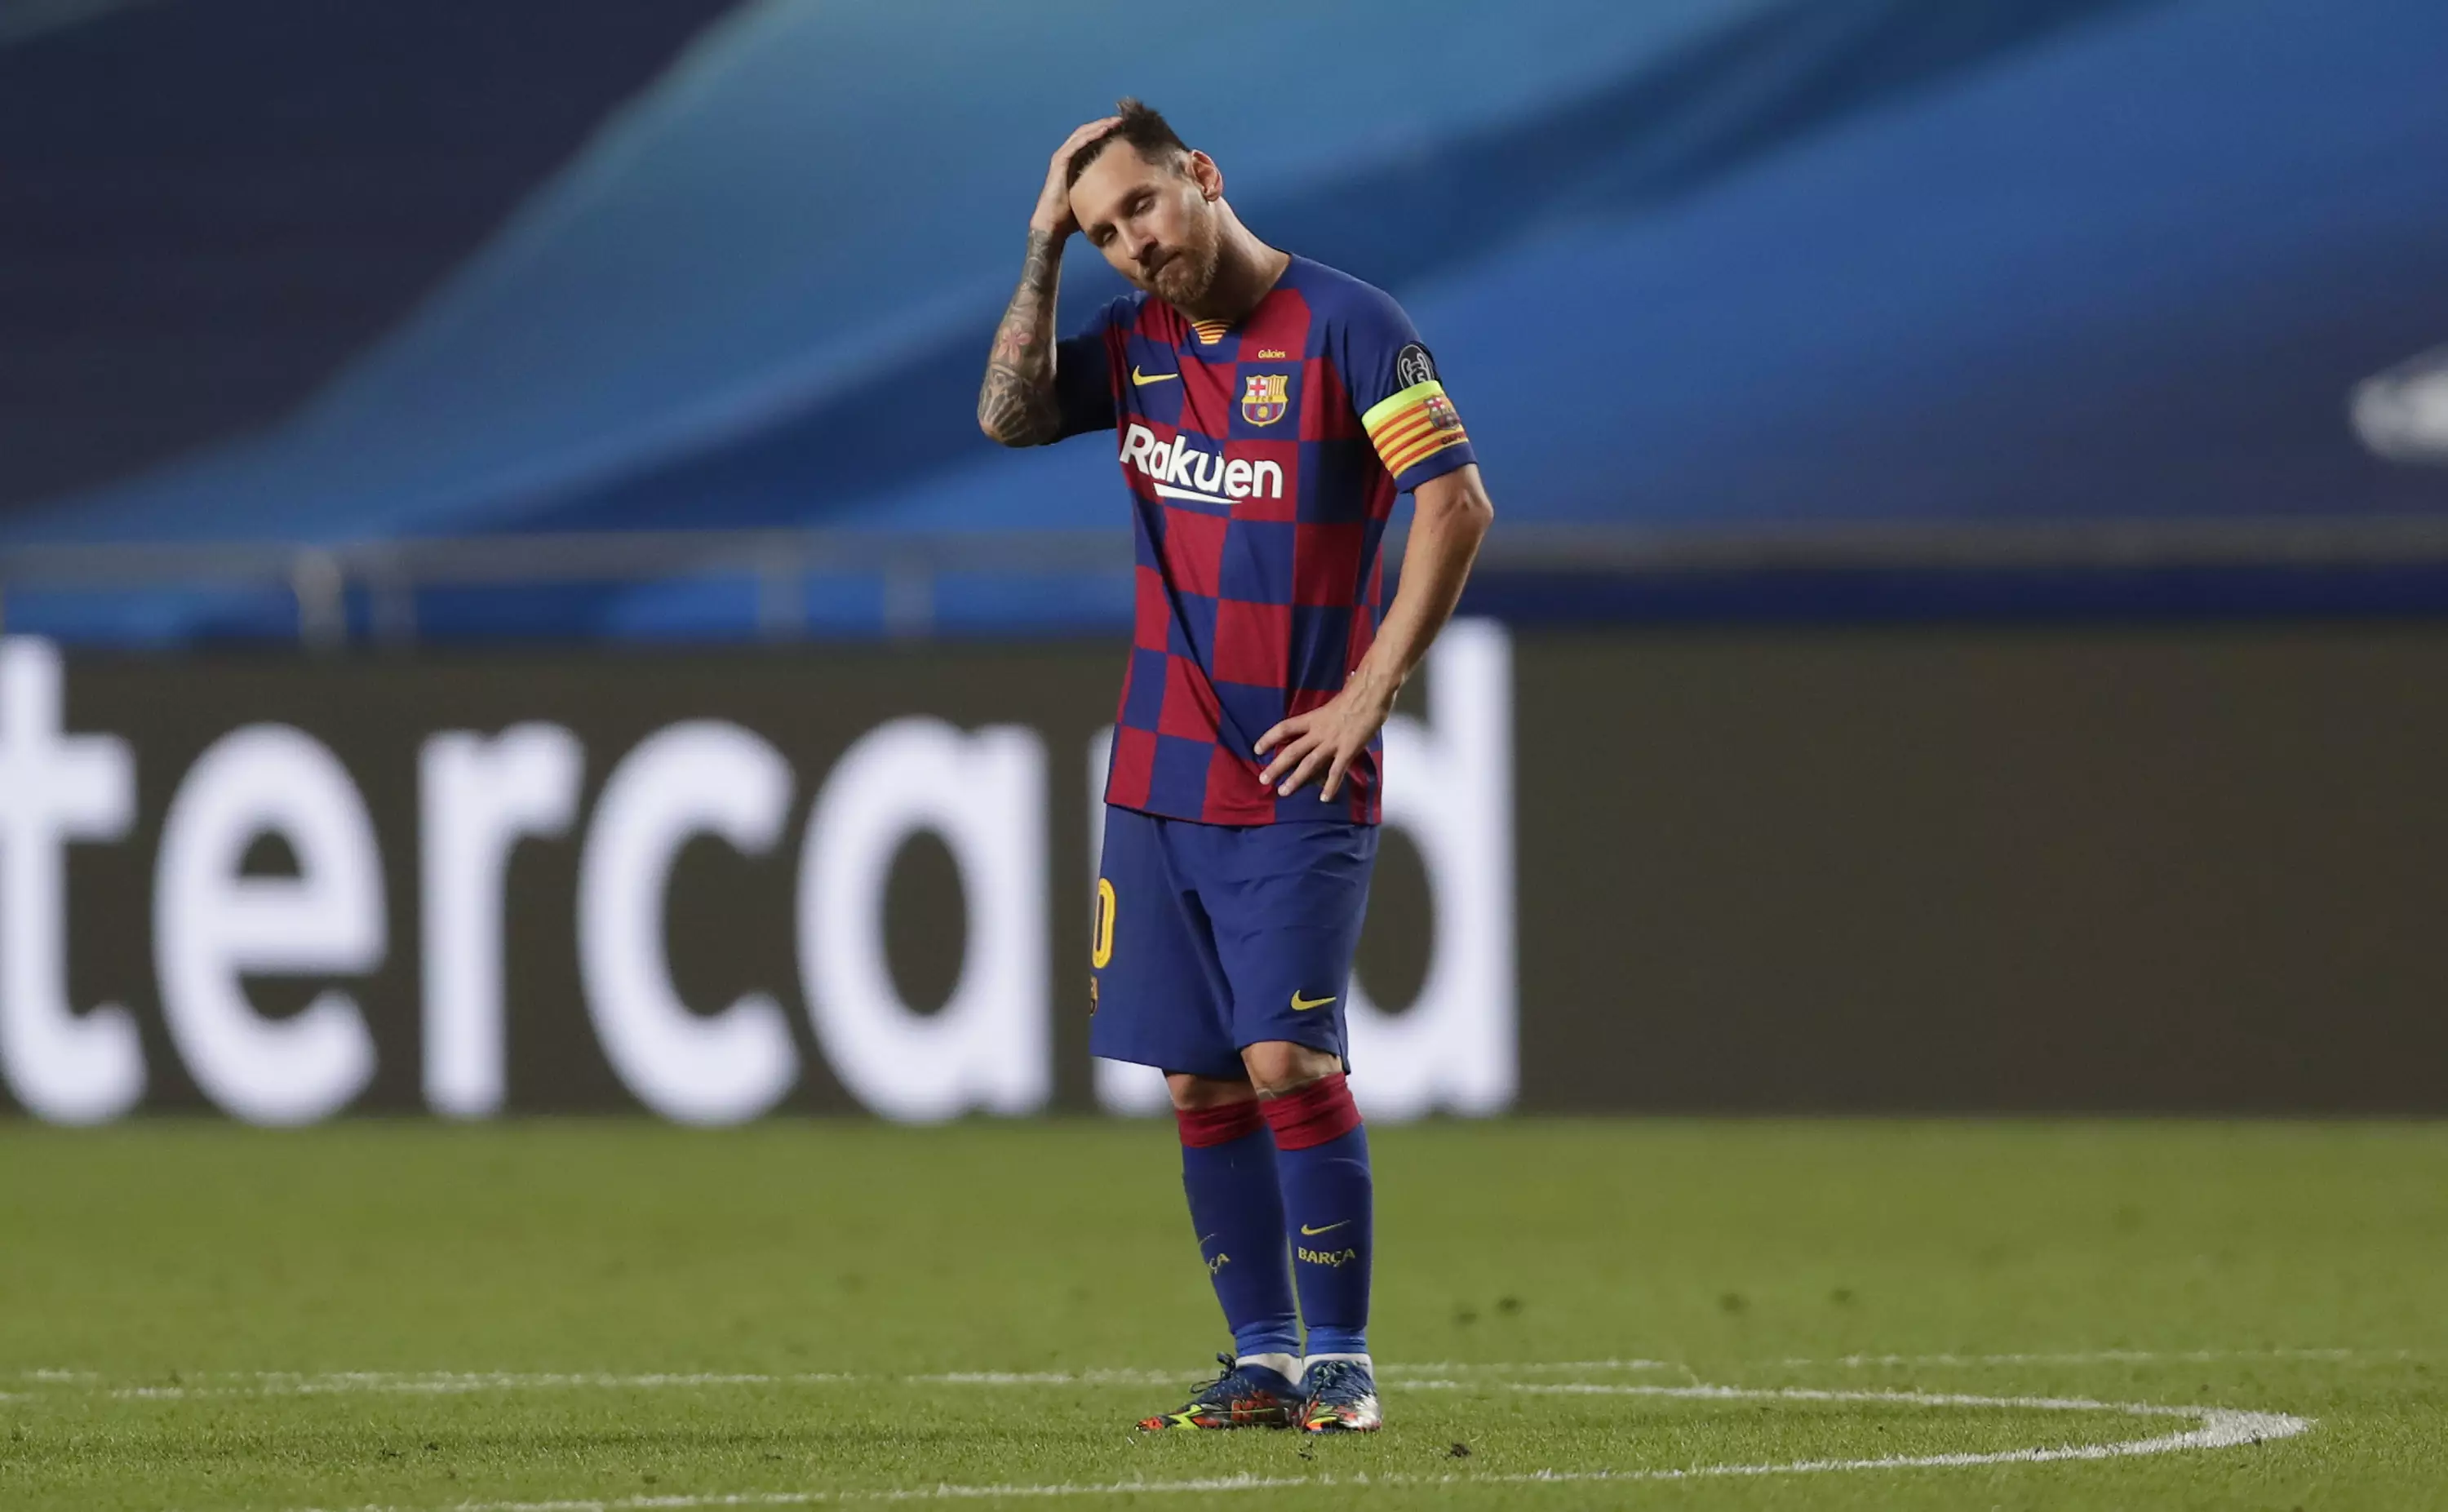 Messi looked likely to leave after the 8-2 Champions League loss to Bayern Munich. Image: PA Images